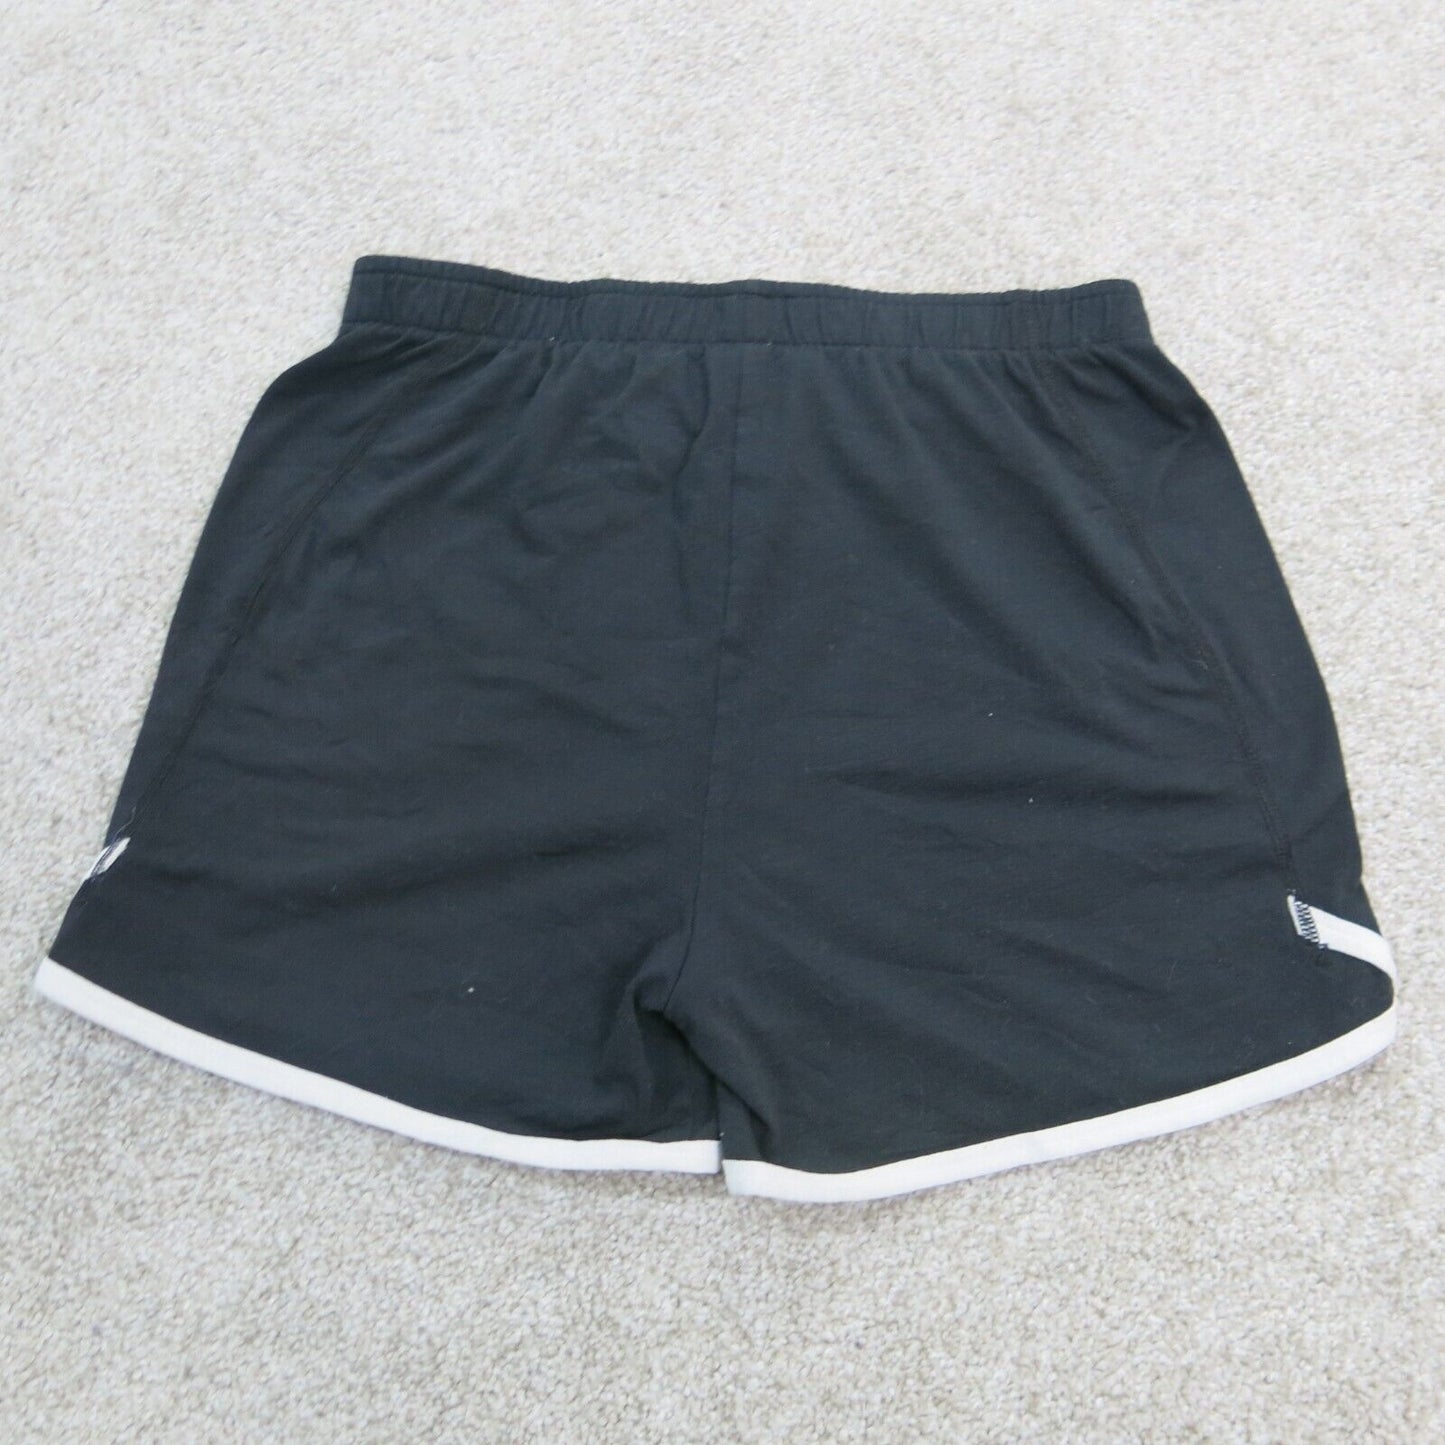 Under Armour Womens Athletic Running Shorts Mid Rise Elastic Waist Black Size M